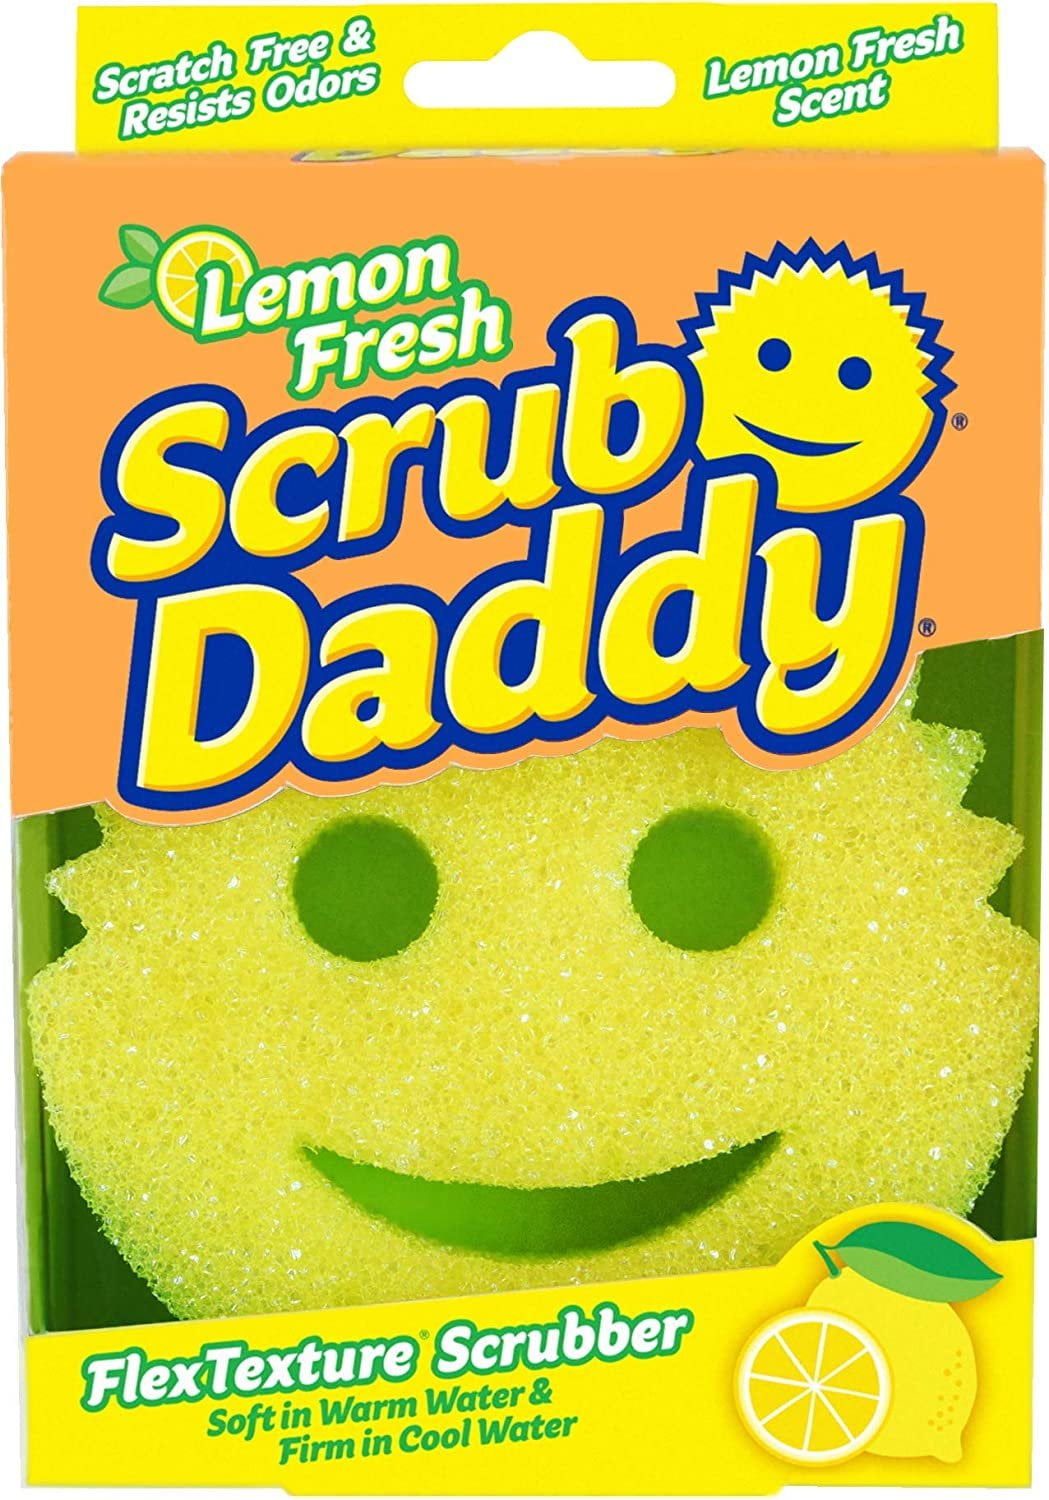 THREE Scrub Daddy Sponge 4-Packs Only $23.48 Shipped, Just $1.95 Each!